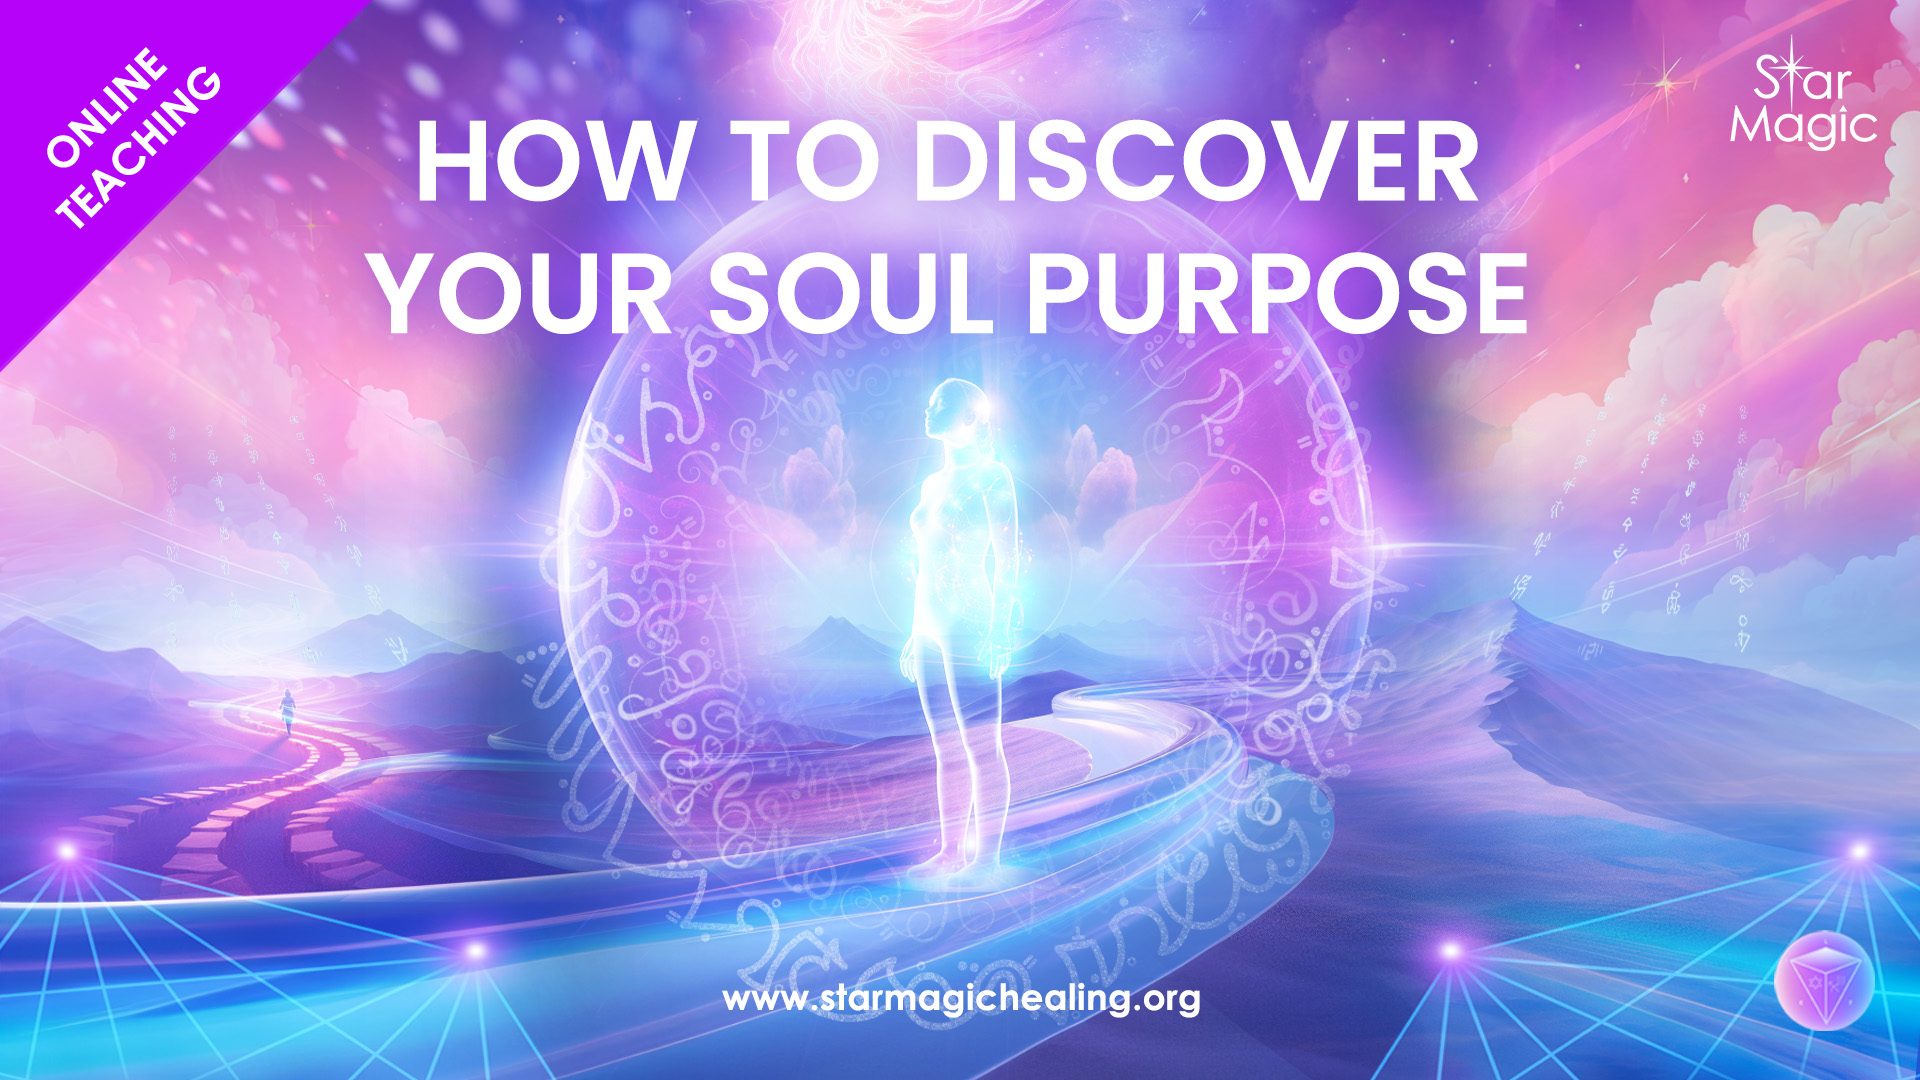 Discover Your Soul Purpose Workshop